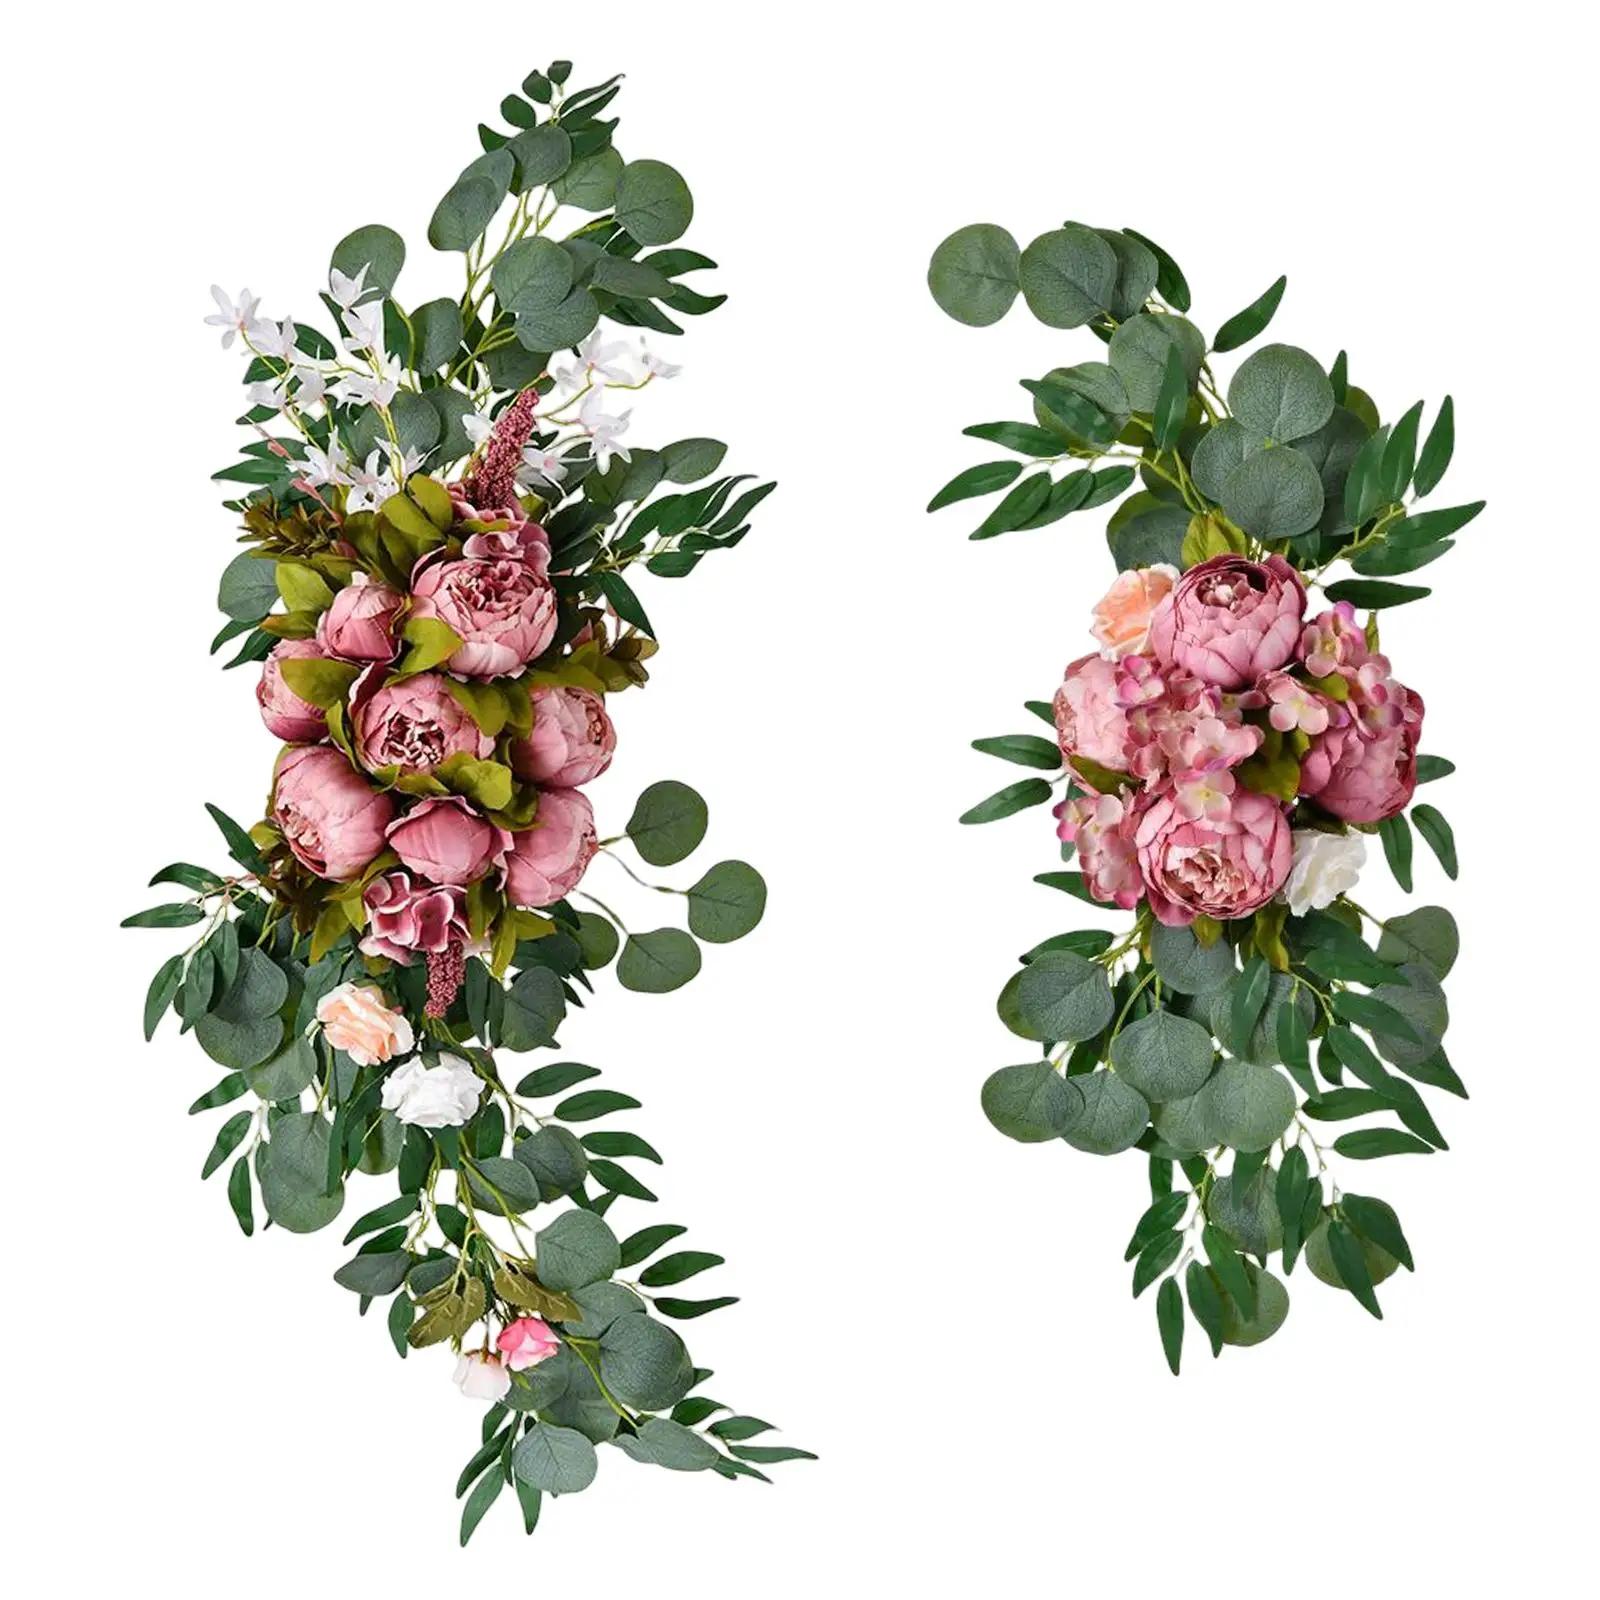 Artificial Flowers Arch Decor Centerpiece Garland Greenery Flower Arrangement Floral Swags for Wall Living Room Window Party